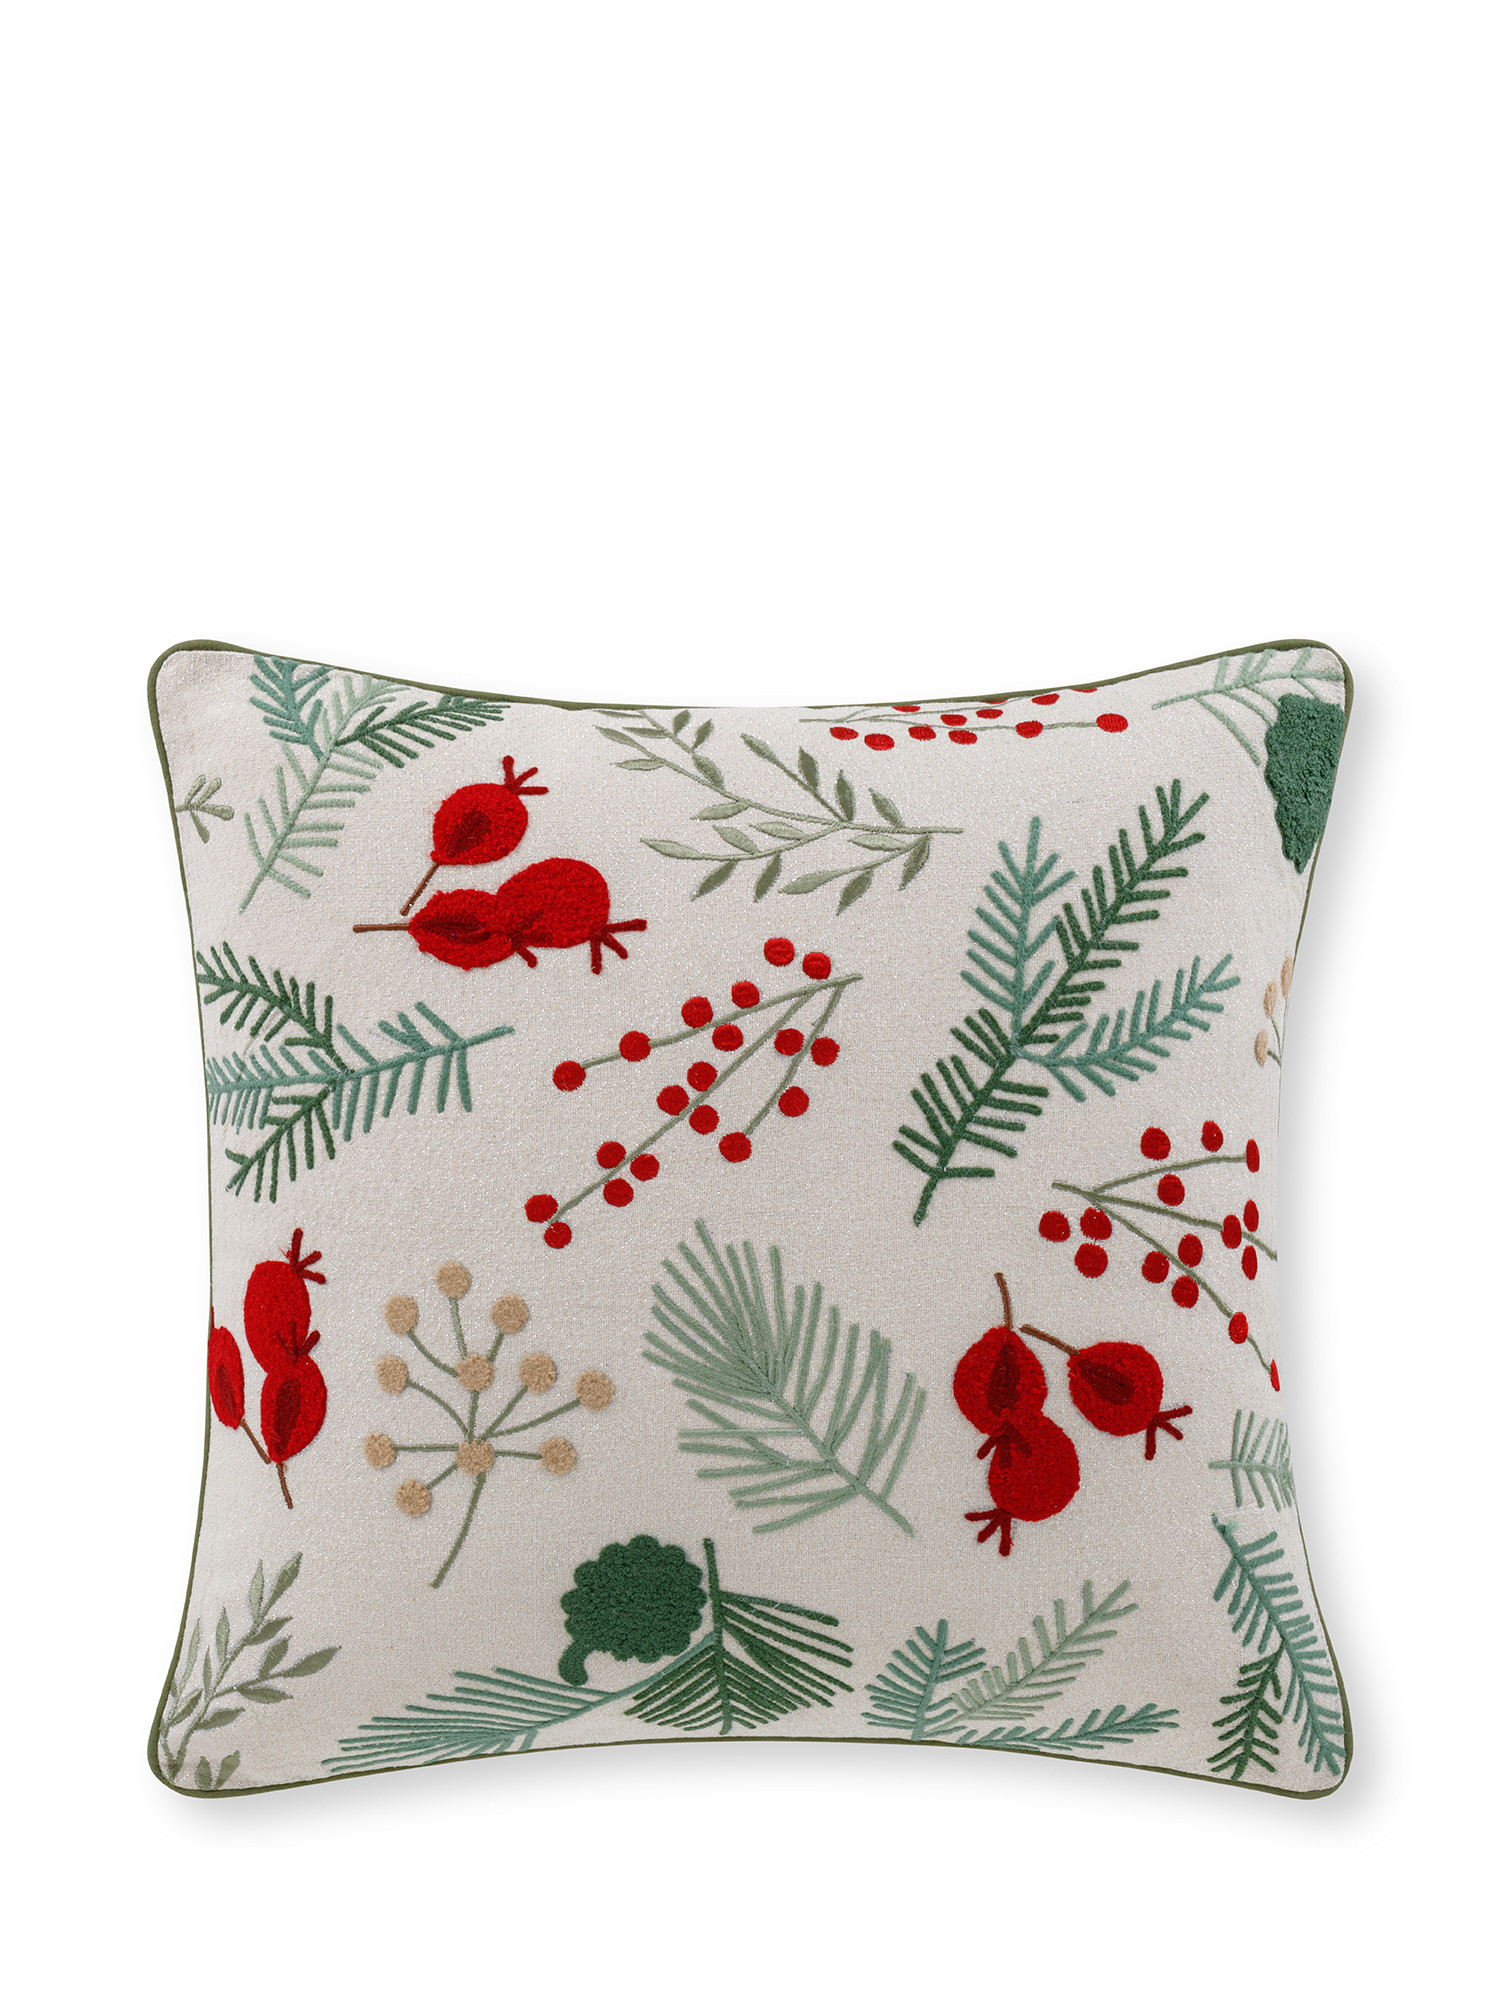 Berries and holly embroidered cushion 45x45 cm, Multicolor, large